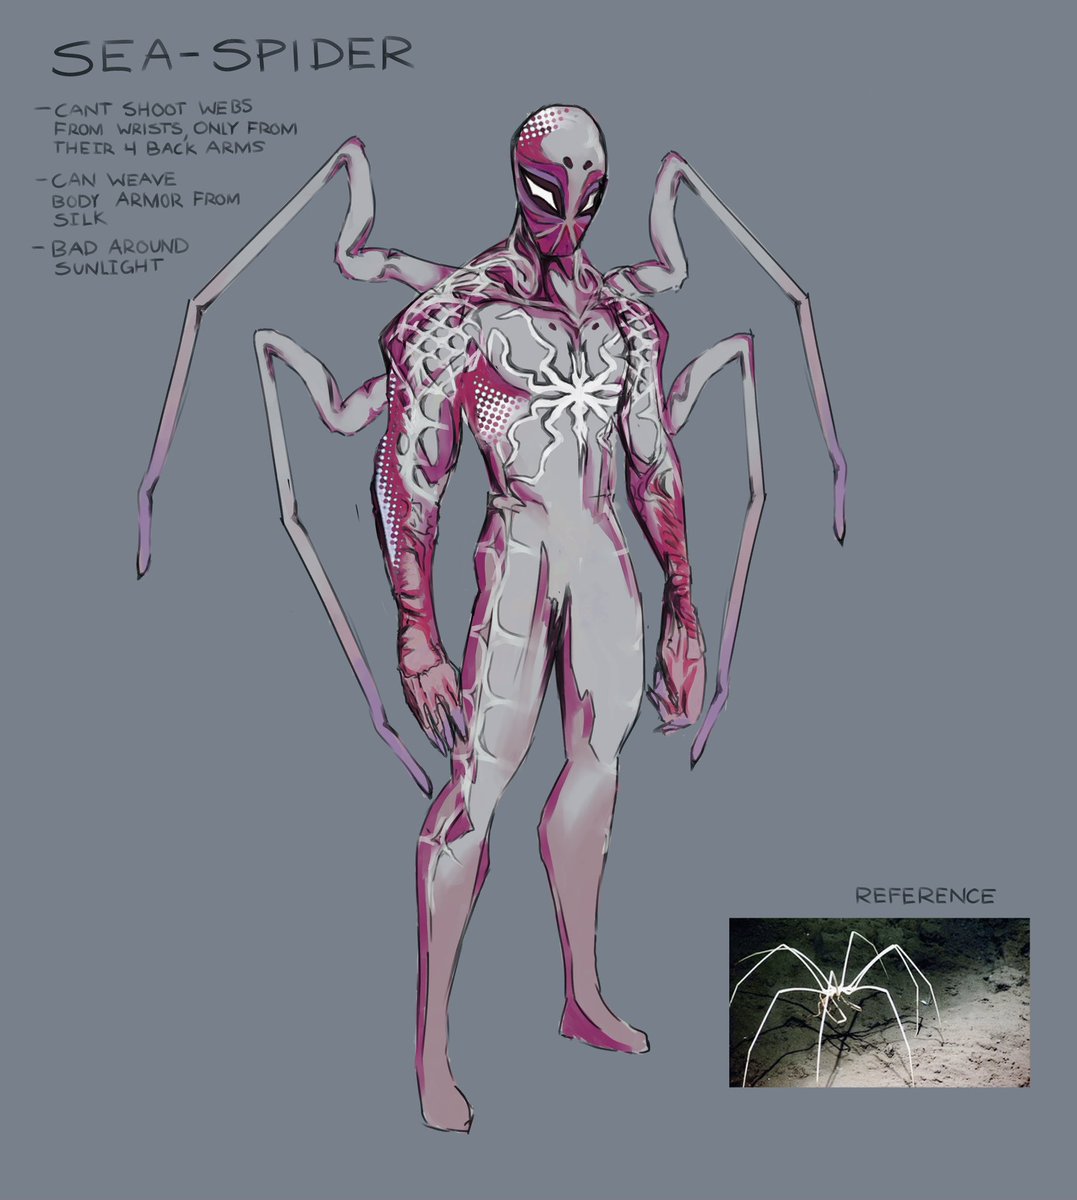 Spiderman if he was a marine biologist and lived on an awesome oil rig